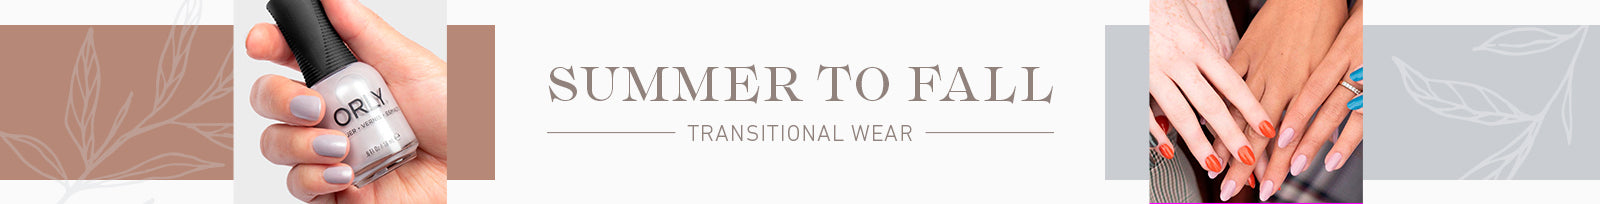 Transitional Wear - Summer to Fall